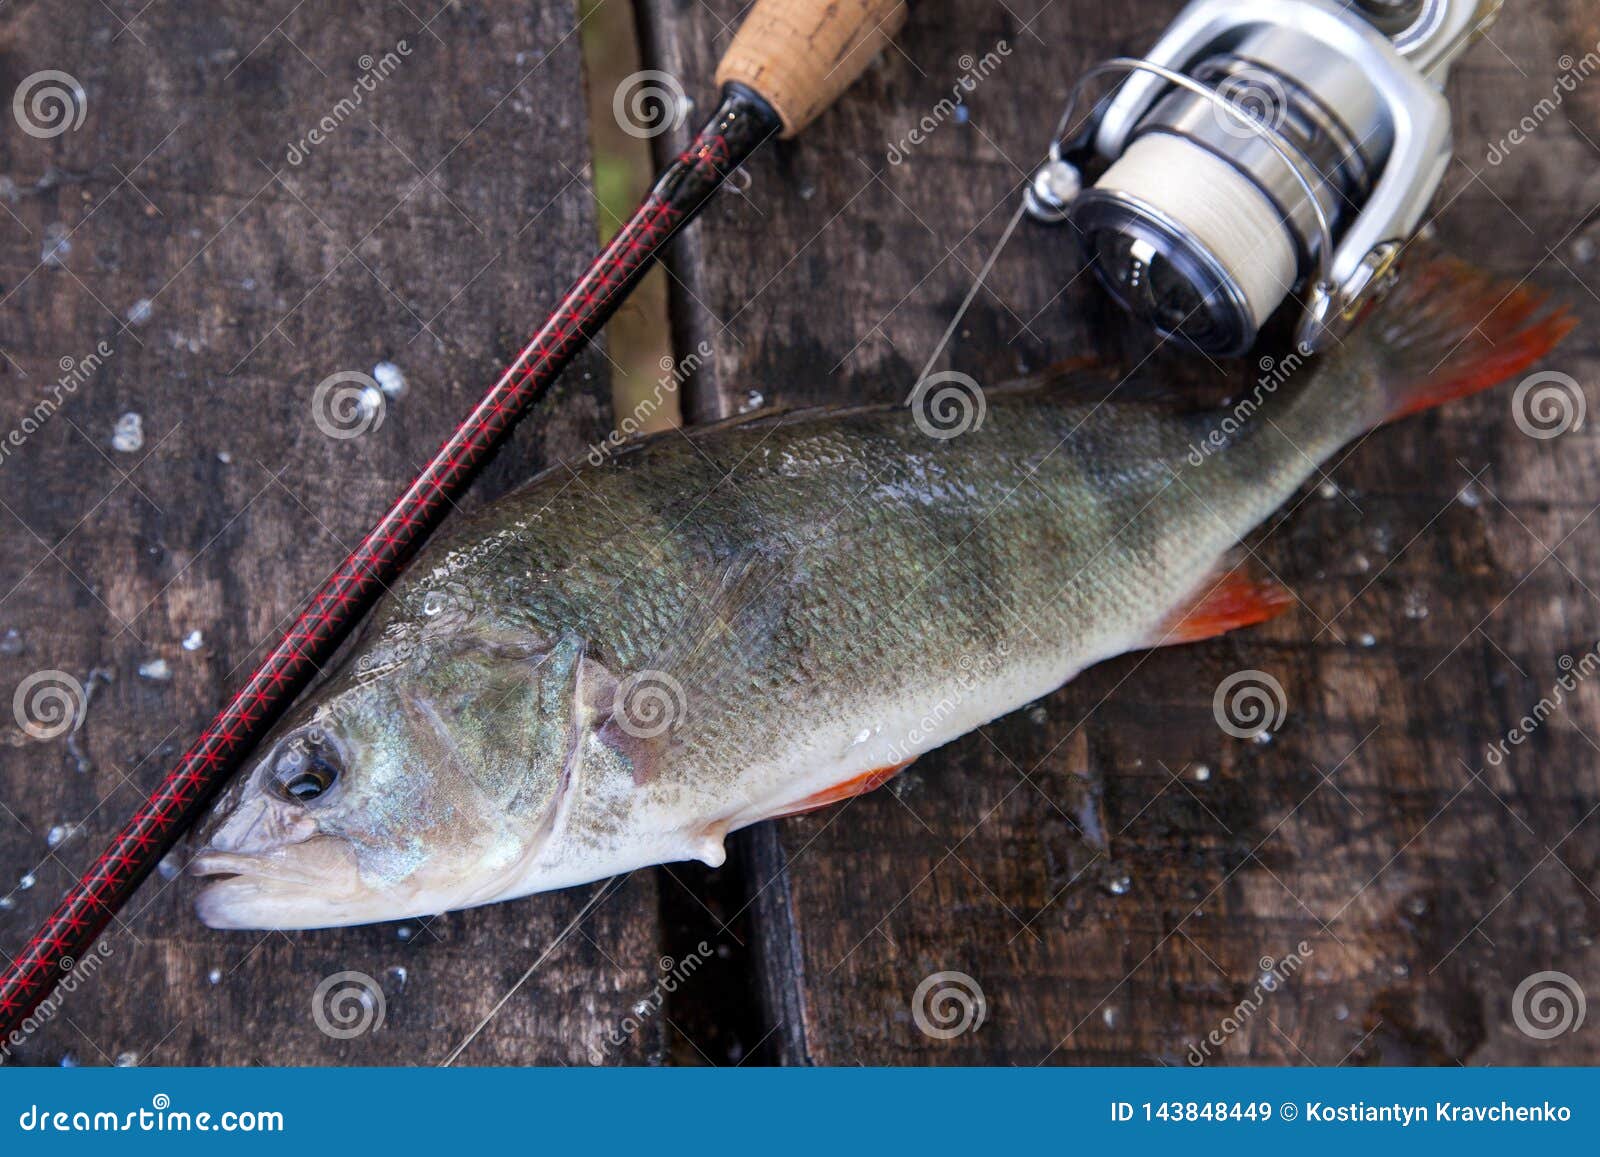 https://thumbs.dreamstime.com/z/trophy-fishing-big-freshwater-perch-equipment-wooden-background-rod-reel-lying-vintage-concept-catch-fish-just-taken-143848449.jpg